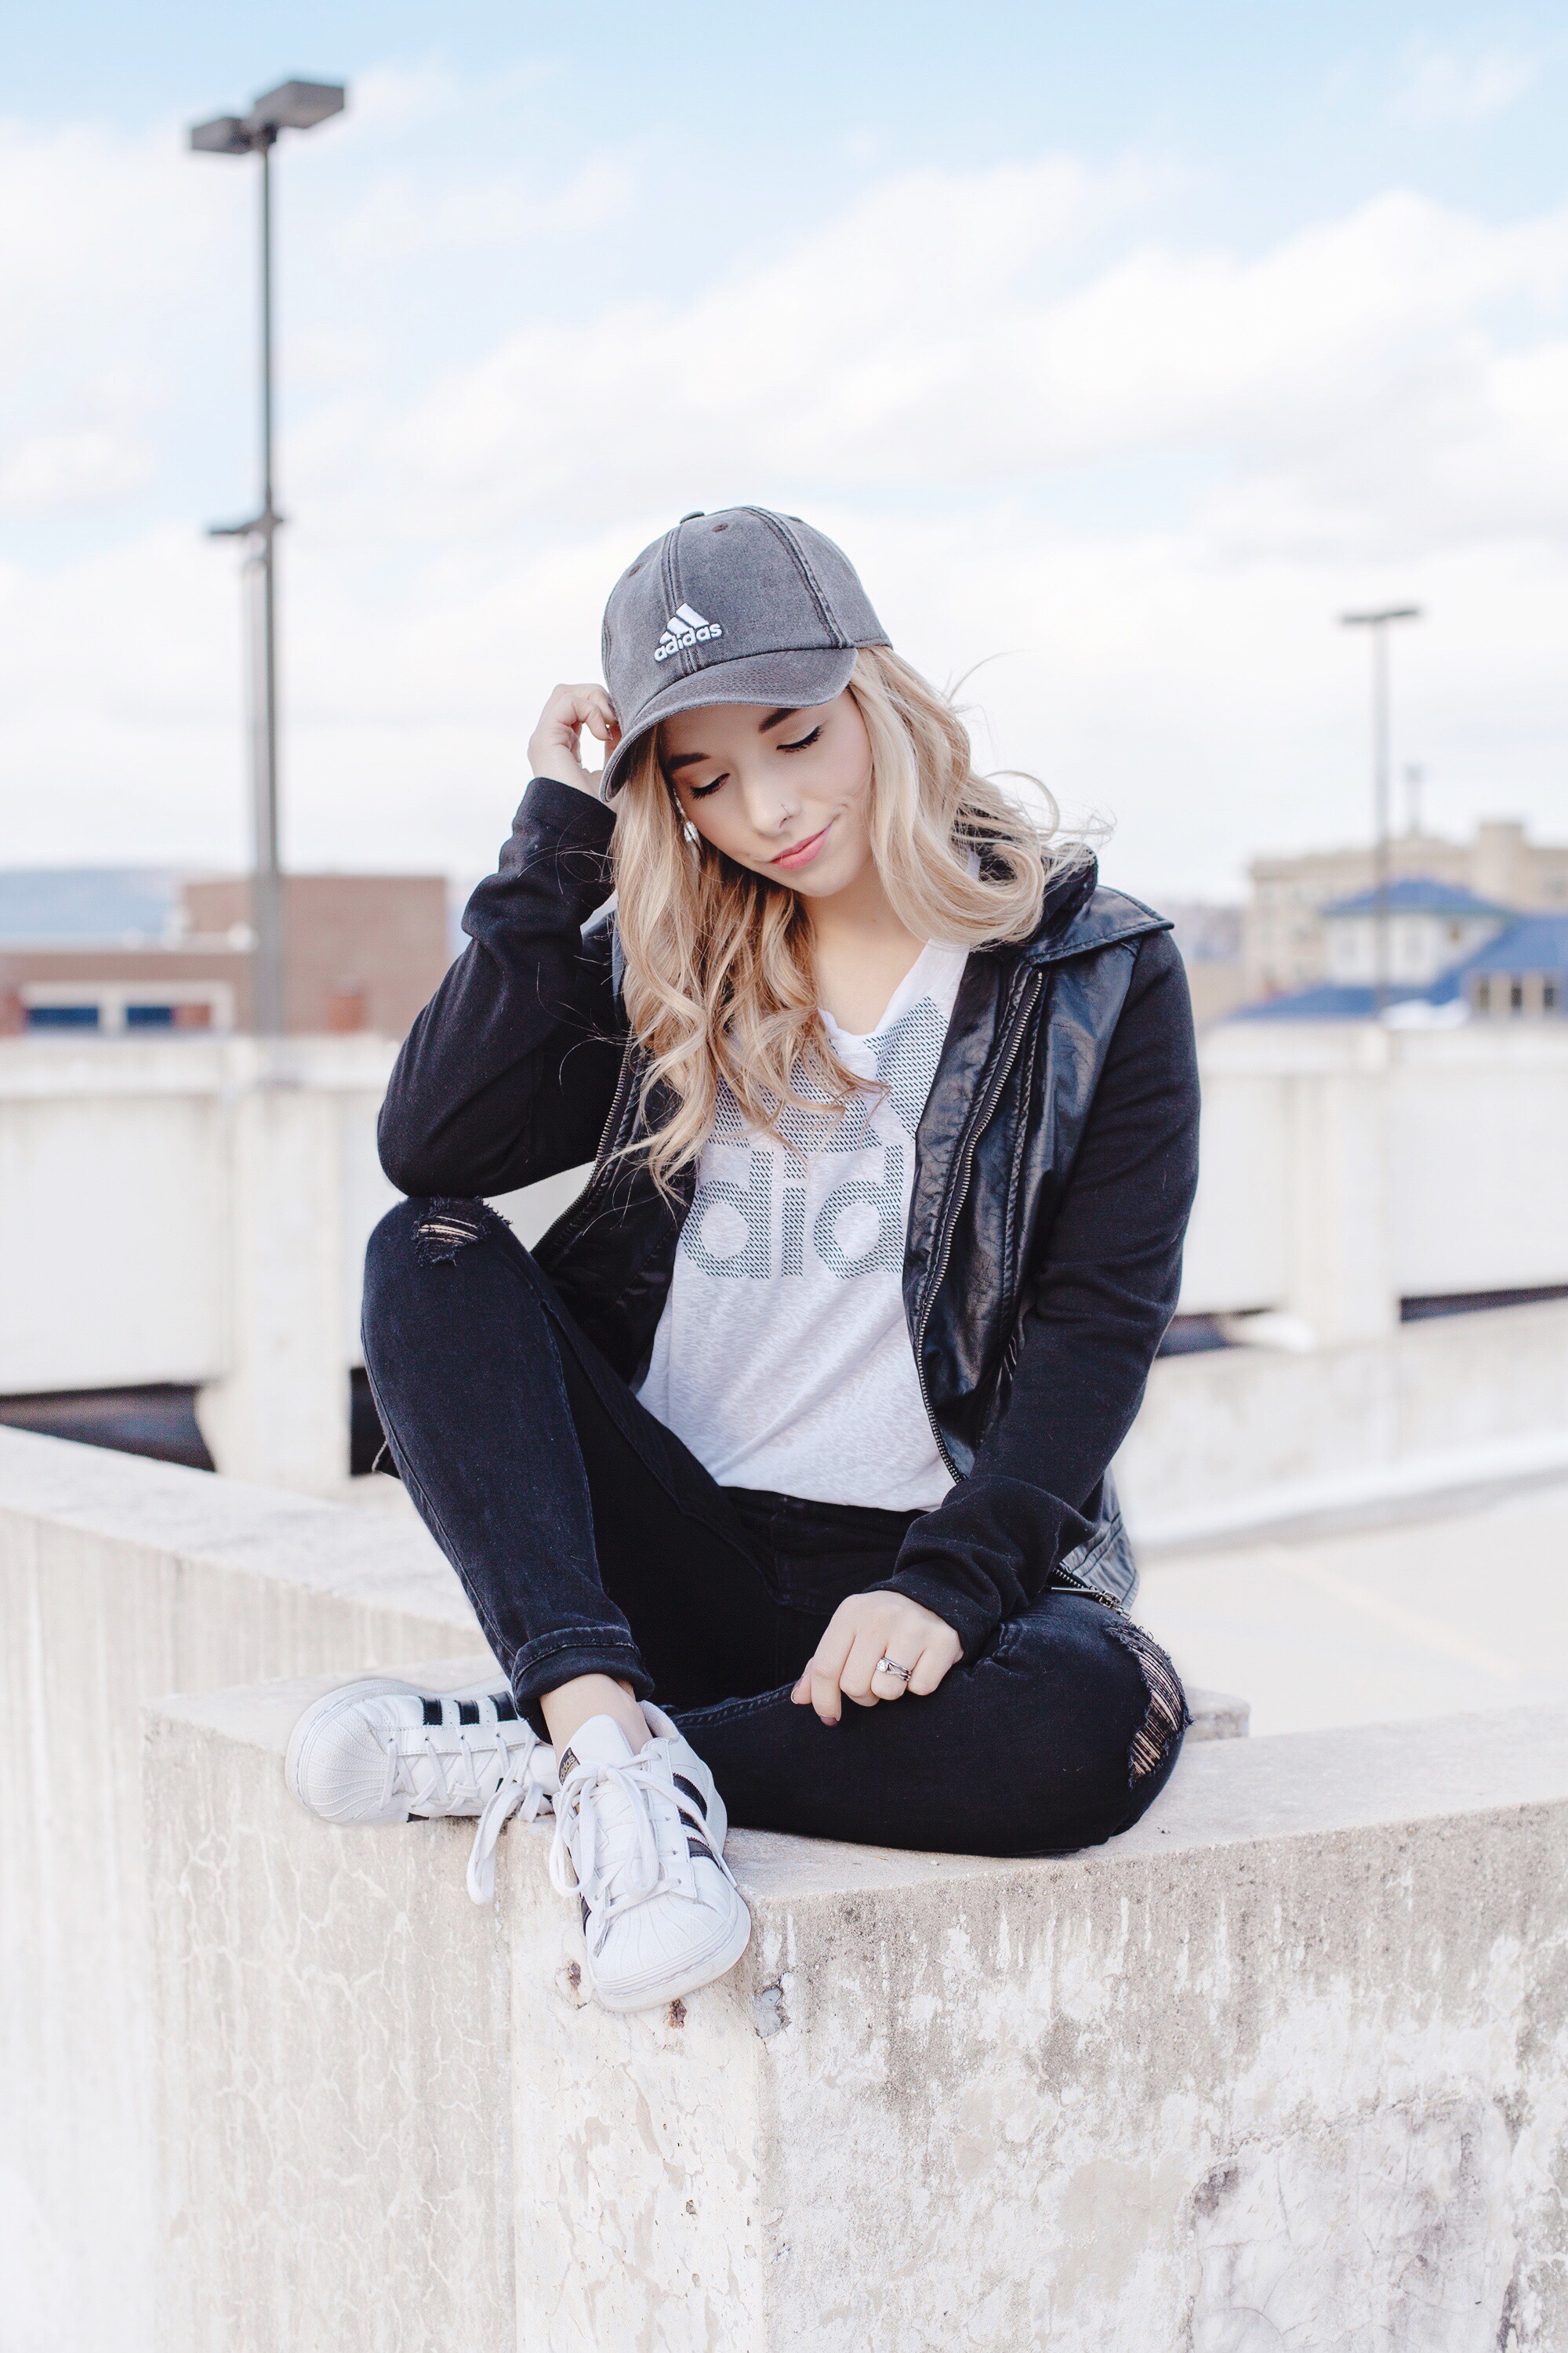 adidas cap outfit